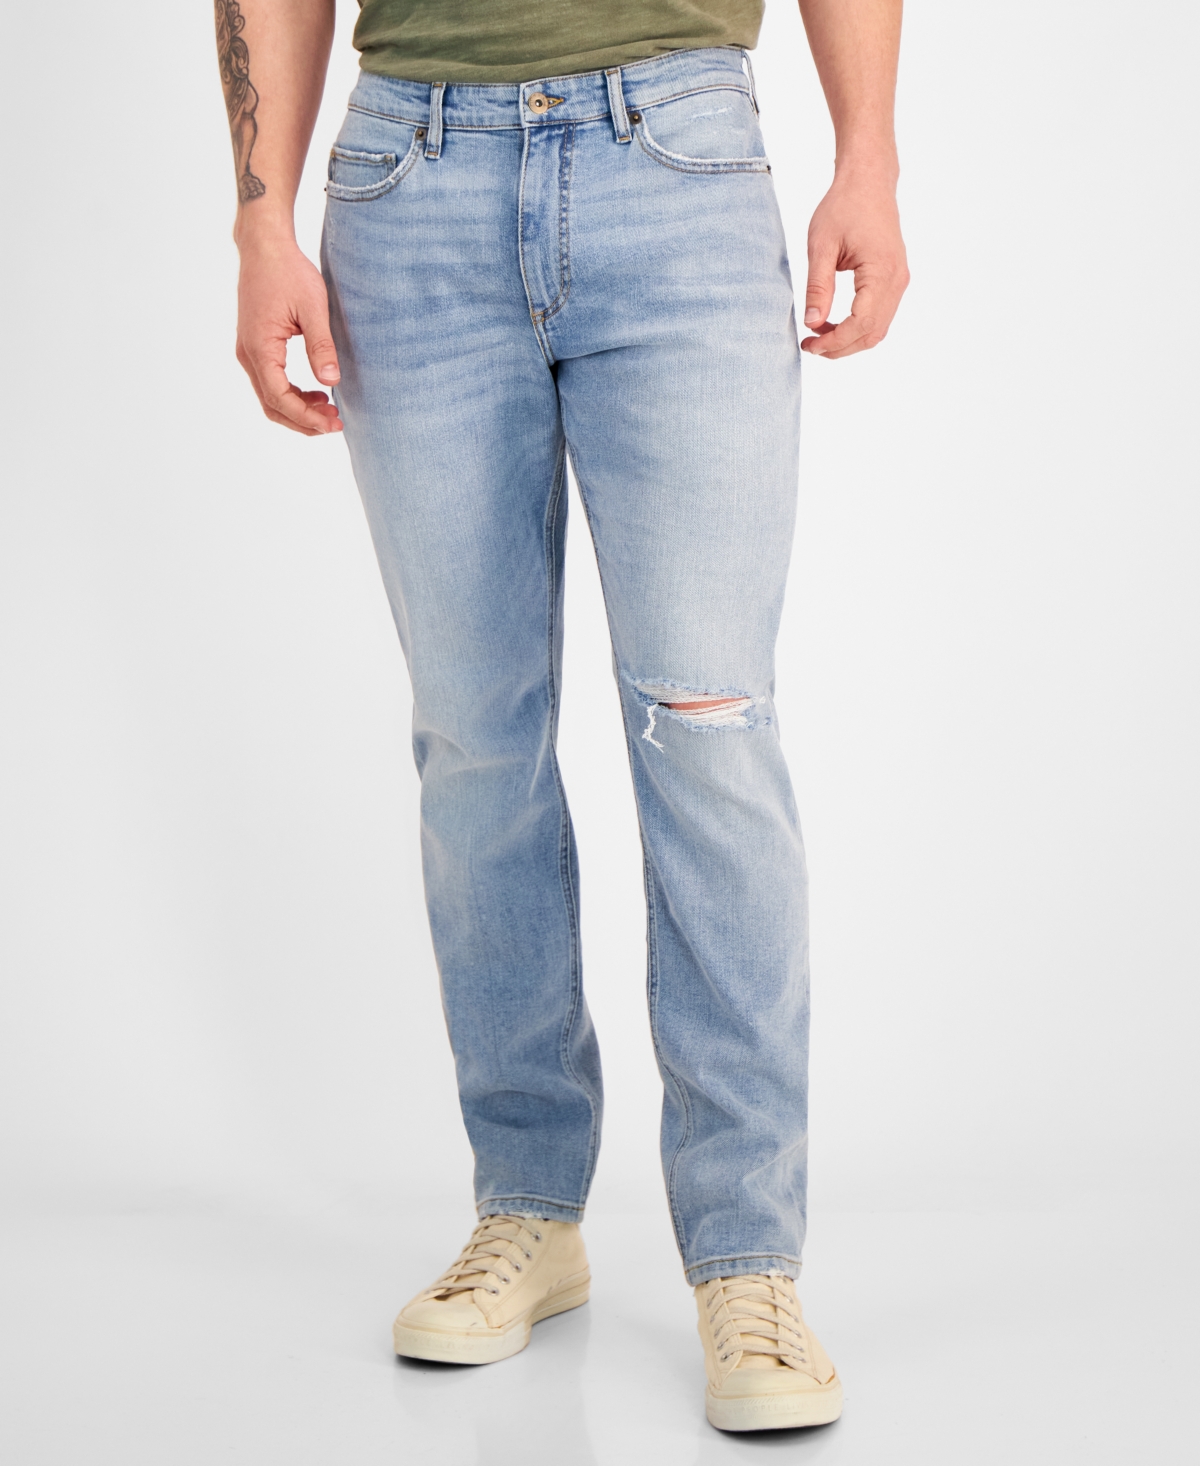 Sun + Stone Men's Horizon Athletic Slim Fit Ripped Jeans, Created For Macy's